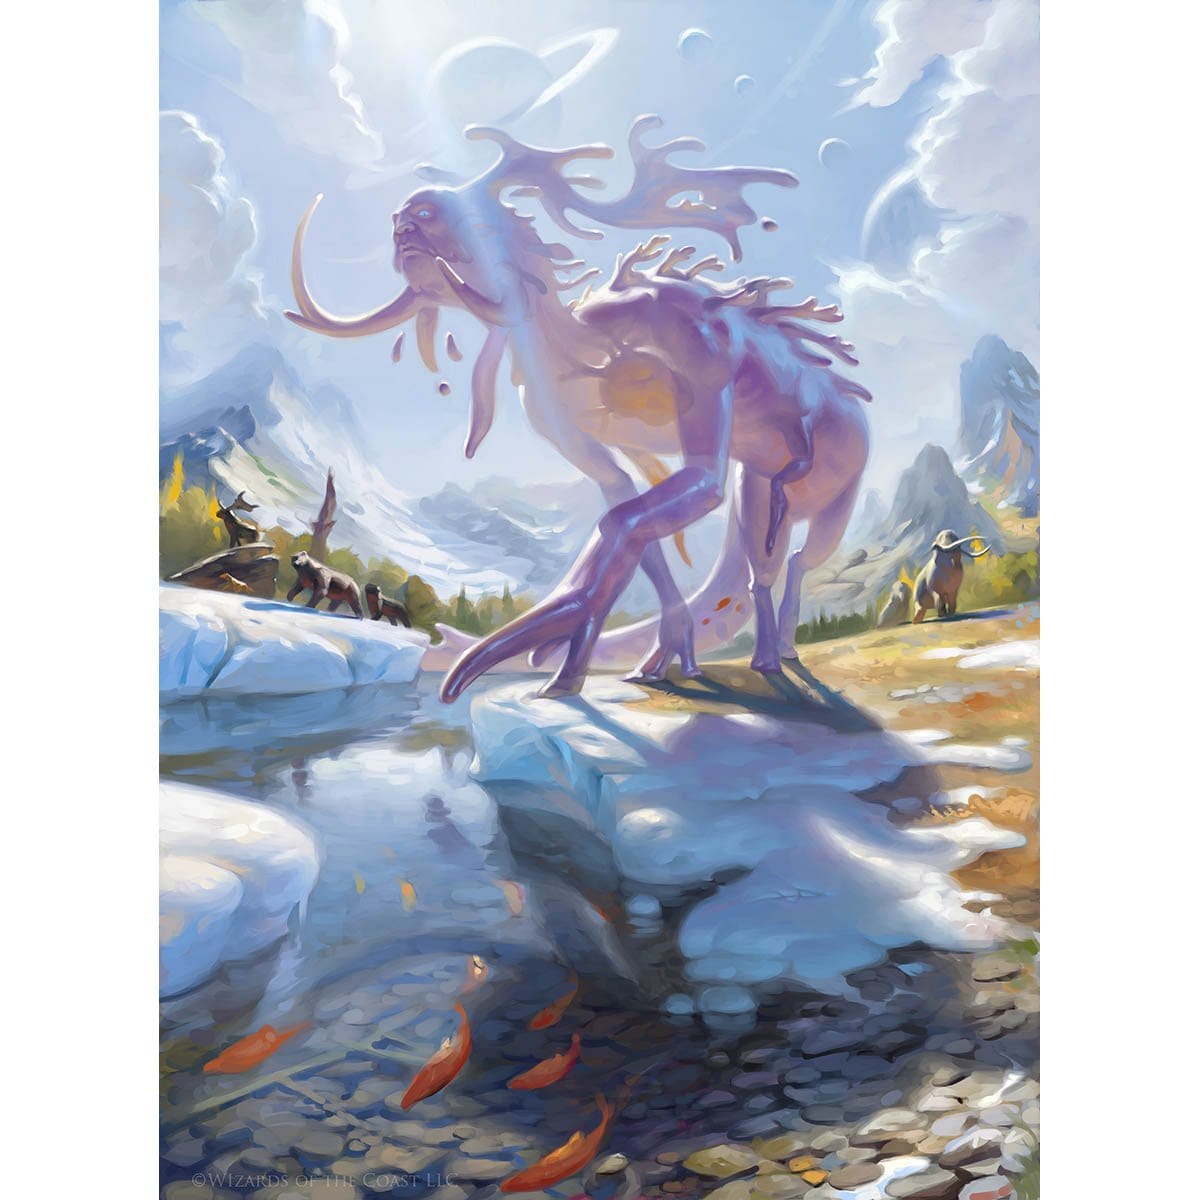 Morophon, the Boundless Print - Print - Original Magic Art - Accessories for Magic the Gathering and other card games